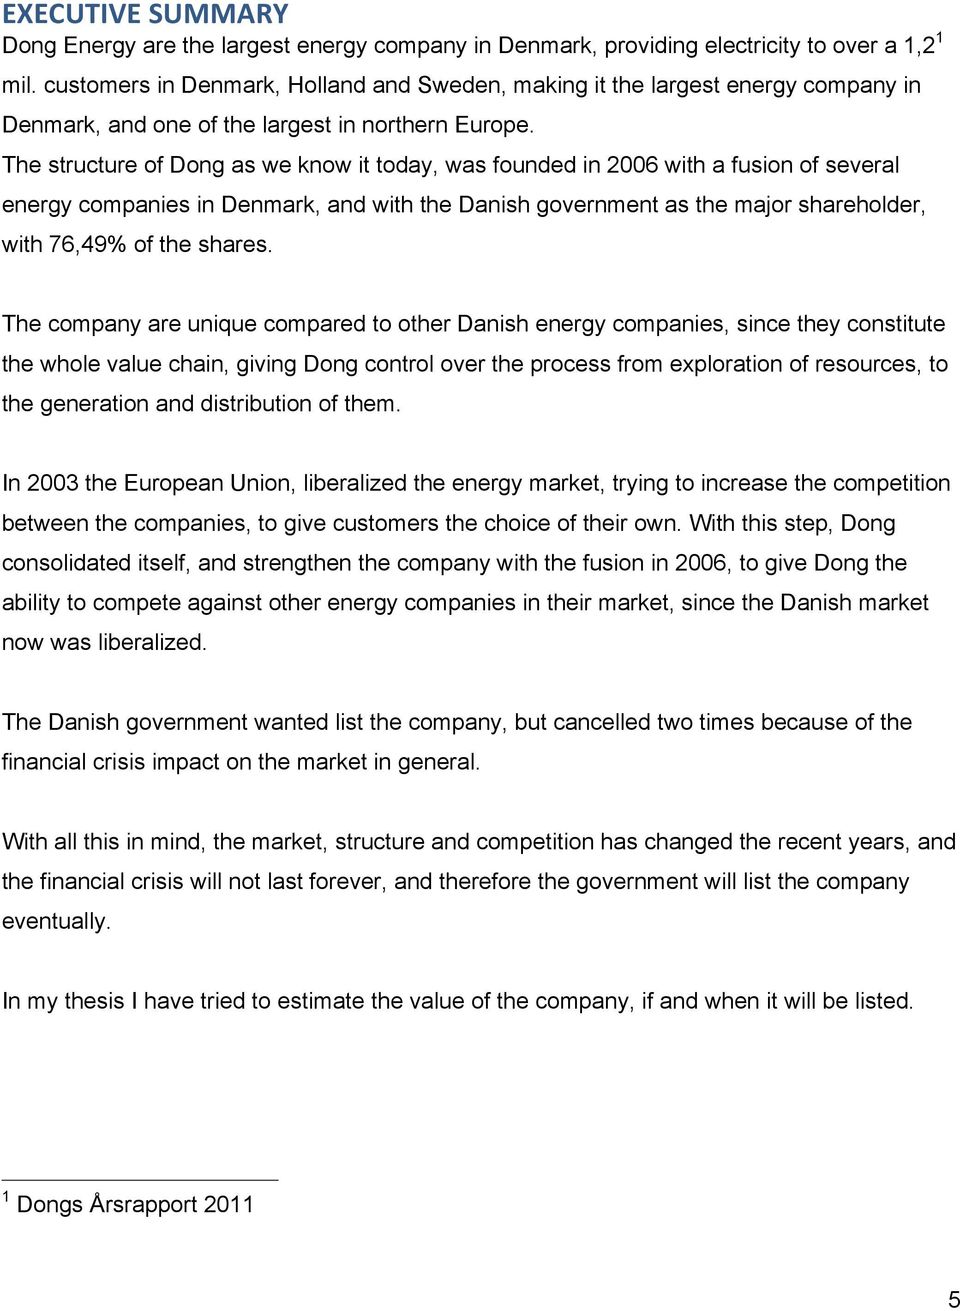 The structure of Dong as we know it today, was founded in 2006 with a fusion of several energy companies in Denmark, and with the Danish government as the major shareholder, with 76,49% of the shares.